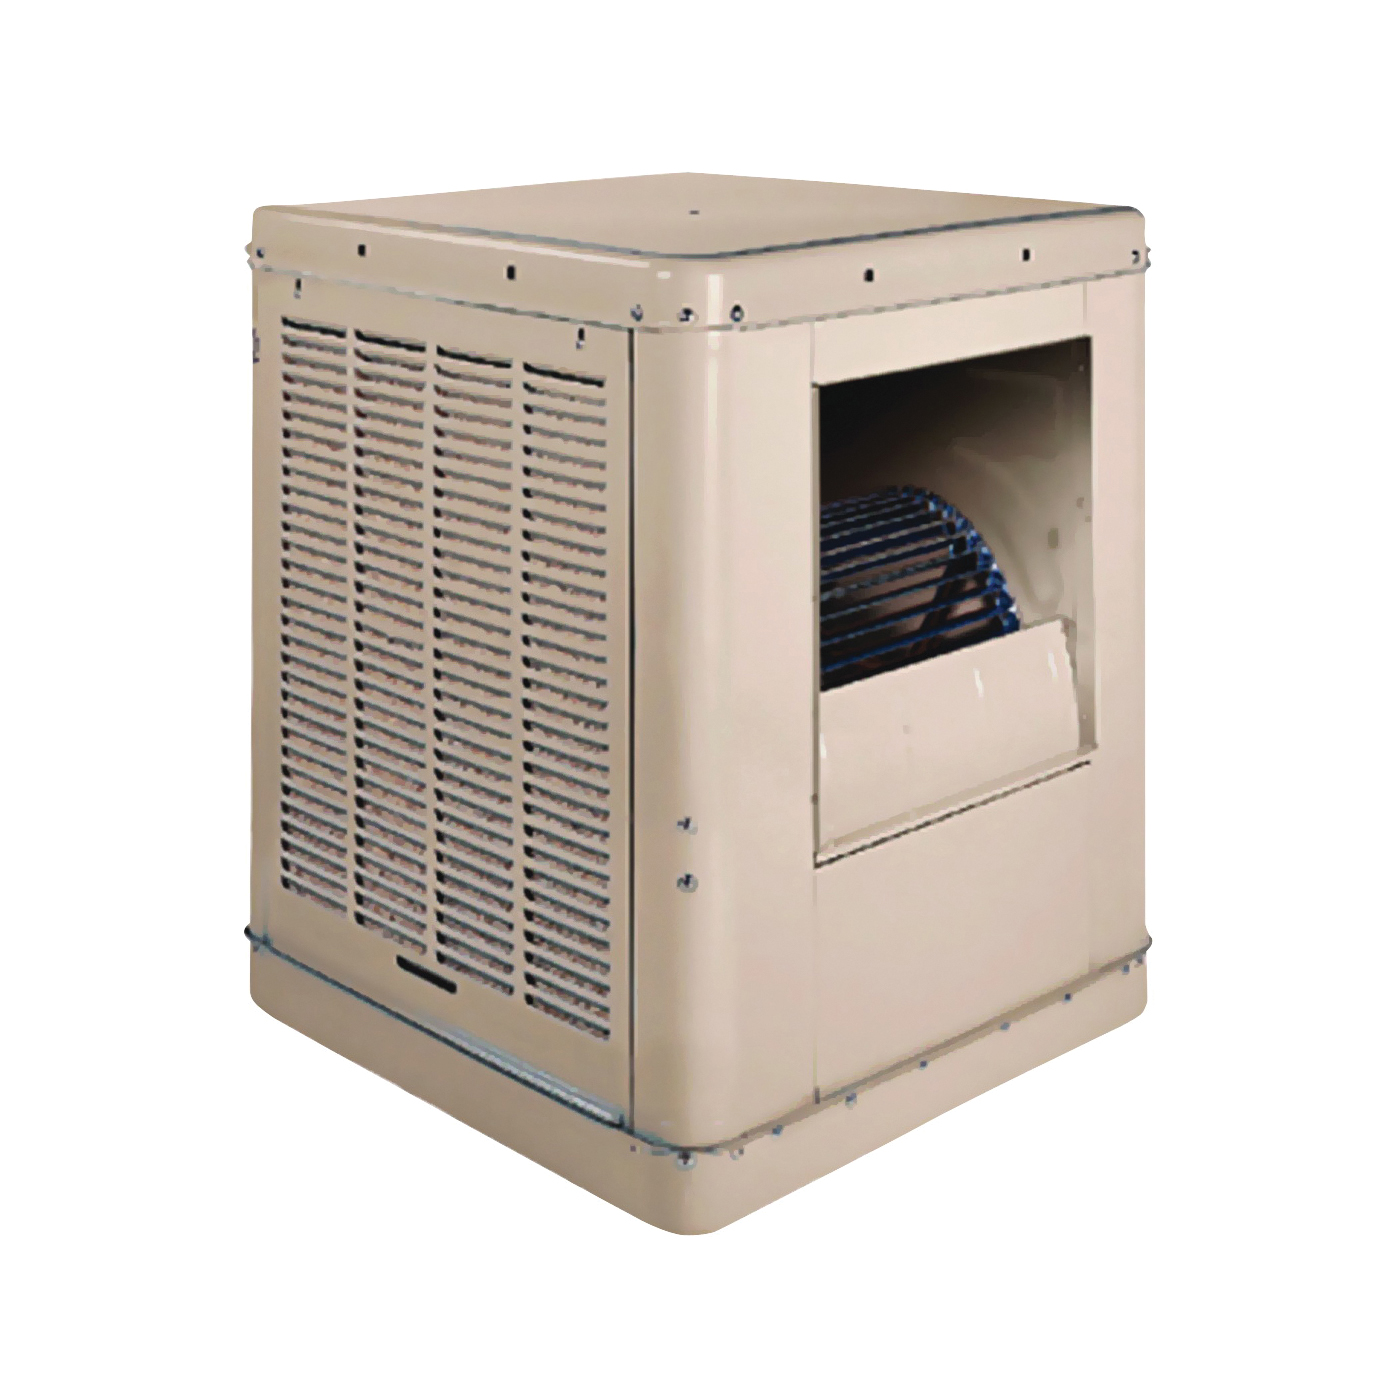 4001SD Evaporative Cooler, 14 gal Tank, 2-Speed, 115 V, 9.8 A, Cool Sand